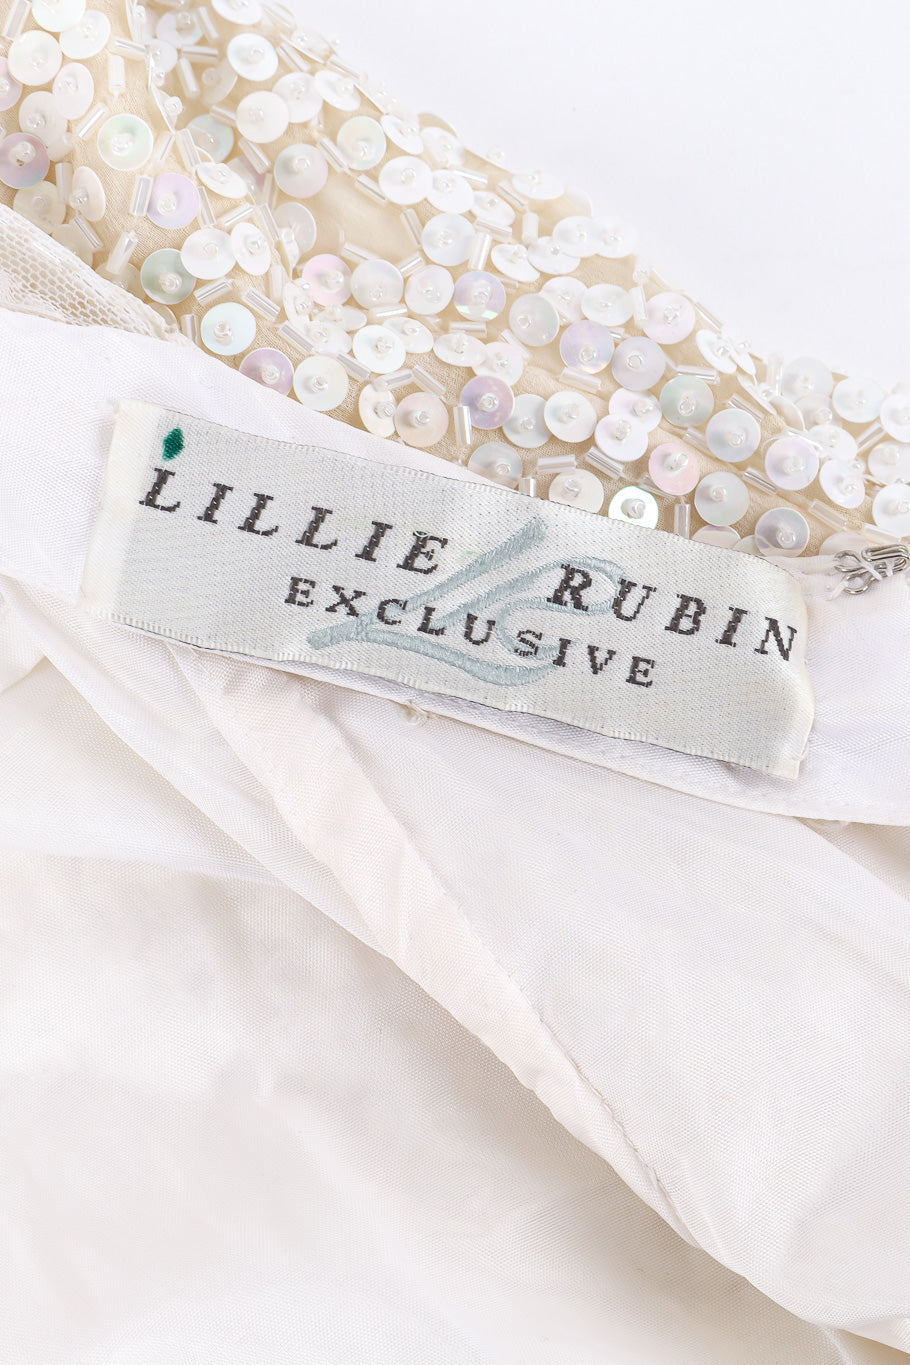 Beaded gown by Lillie Rubin on flat lay label @recessla